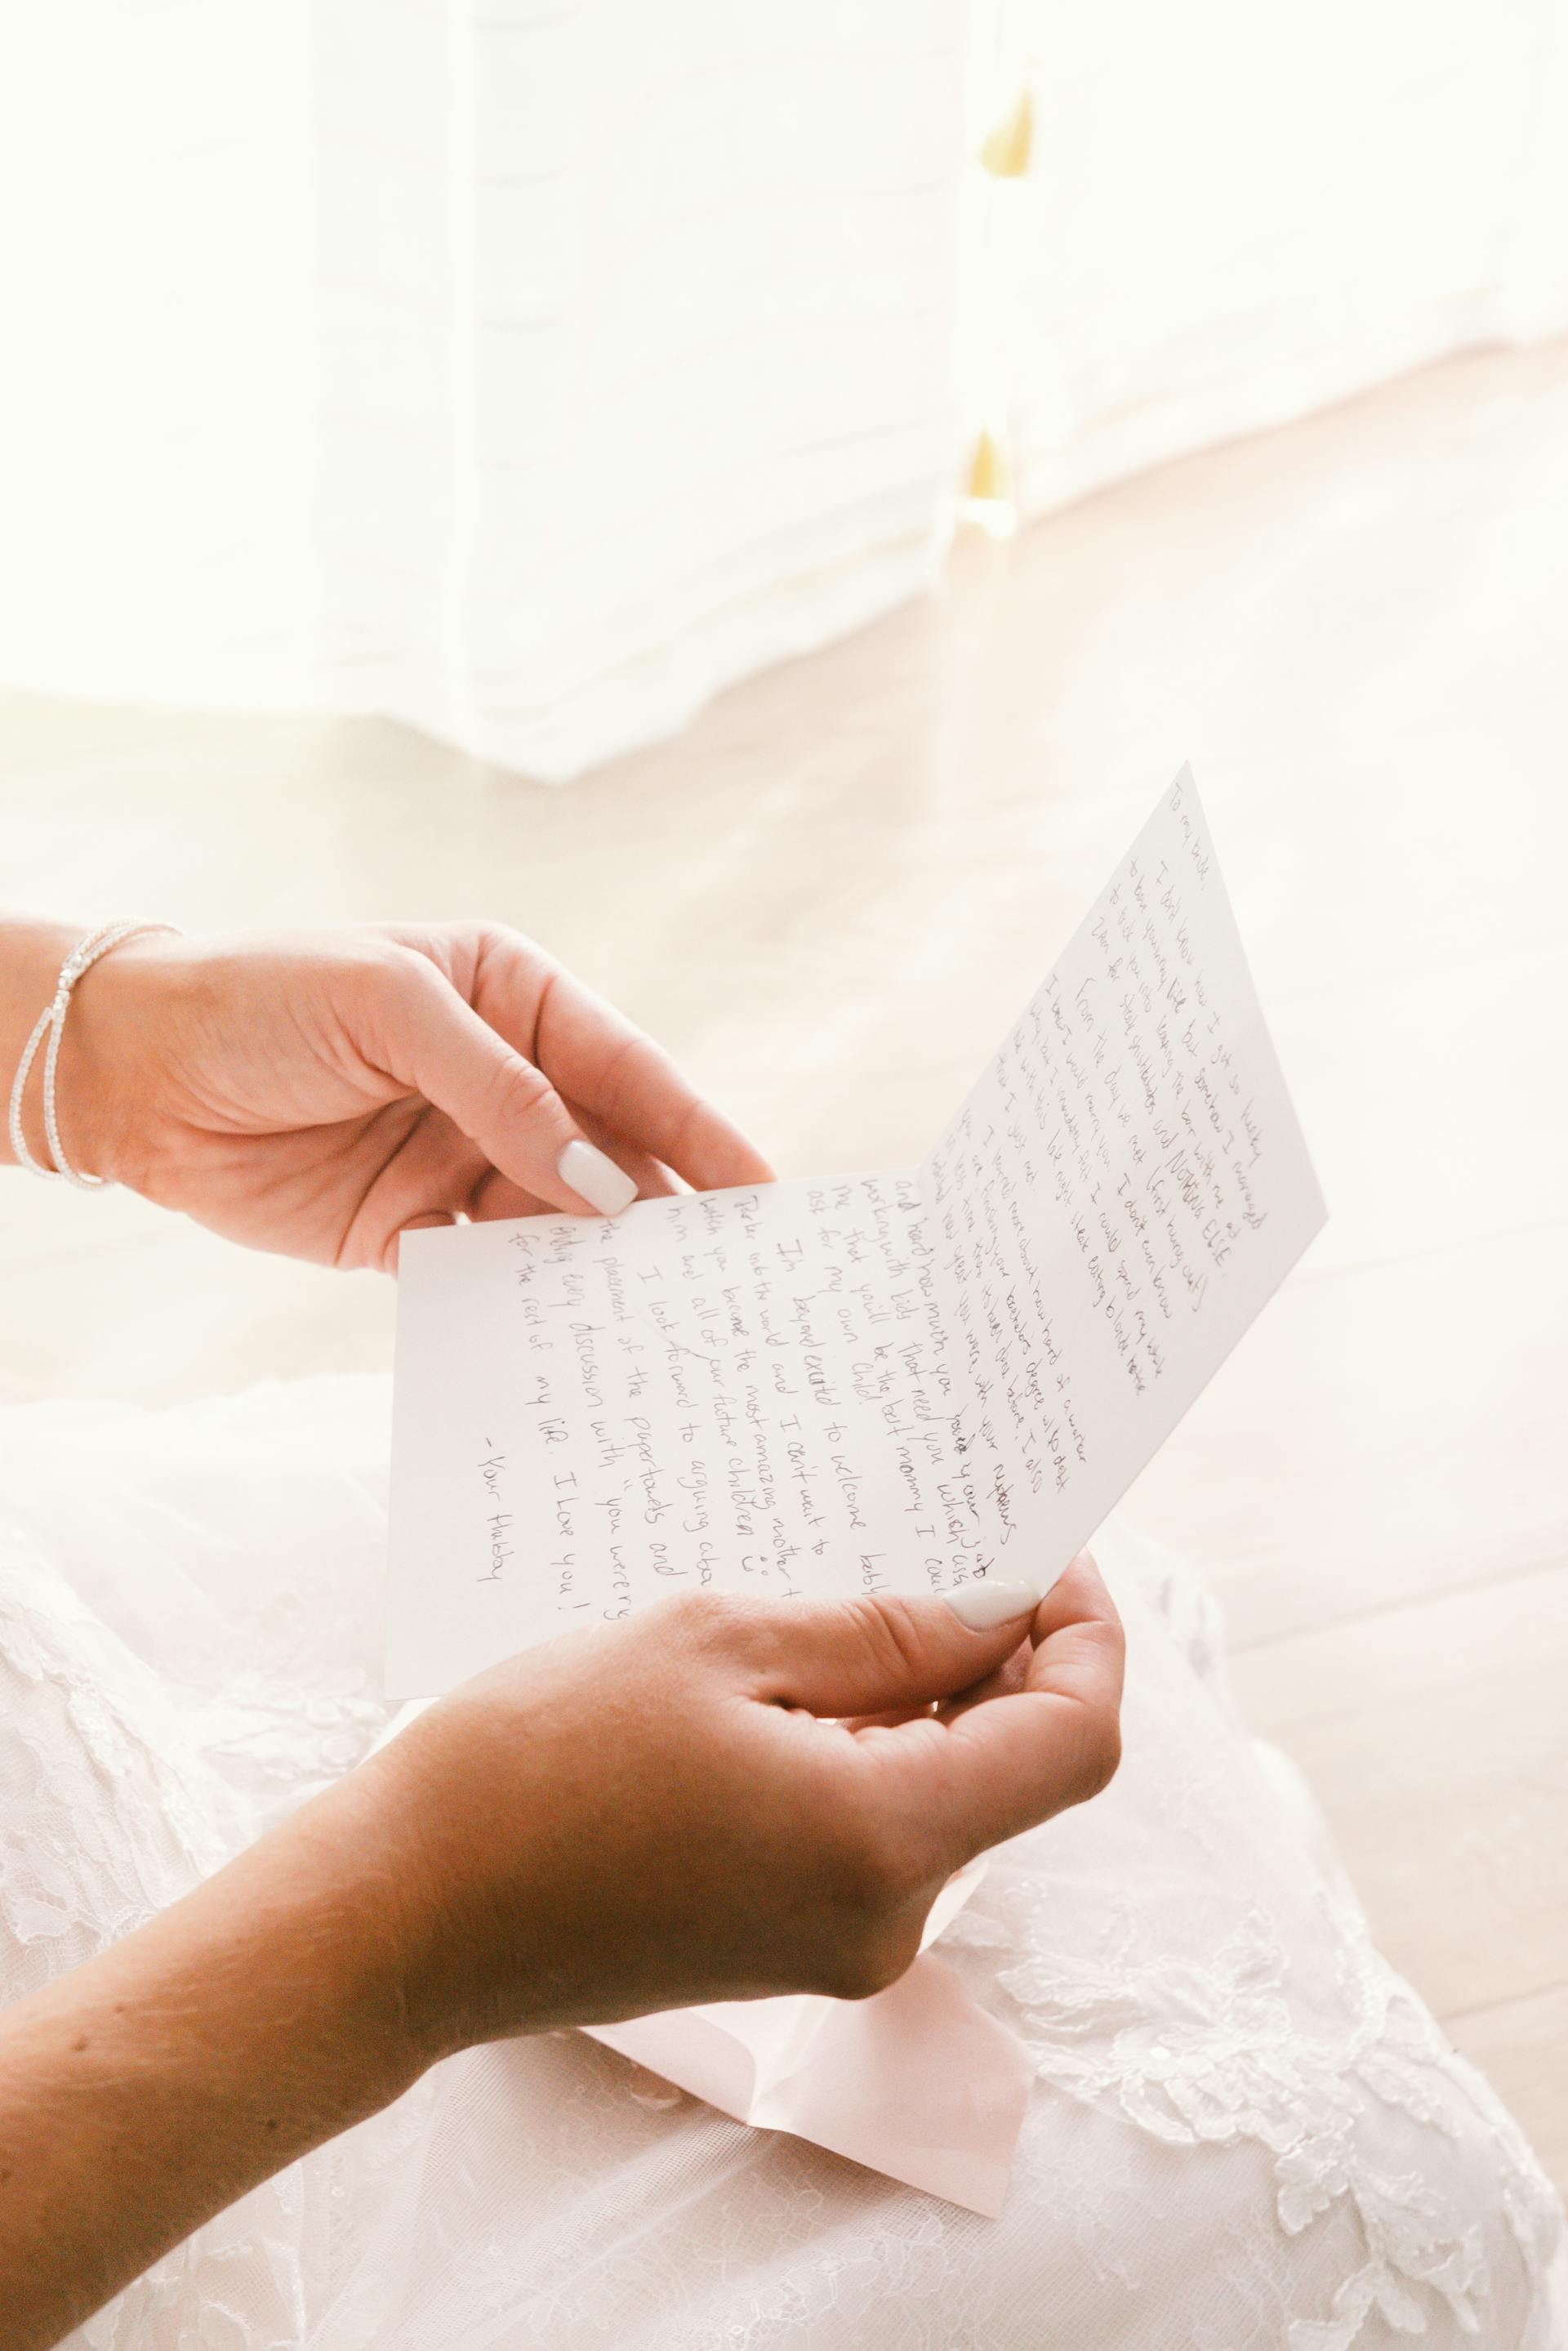 A woman reading a letter | Source: Pexels